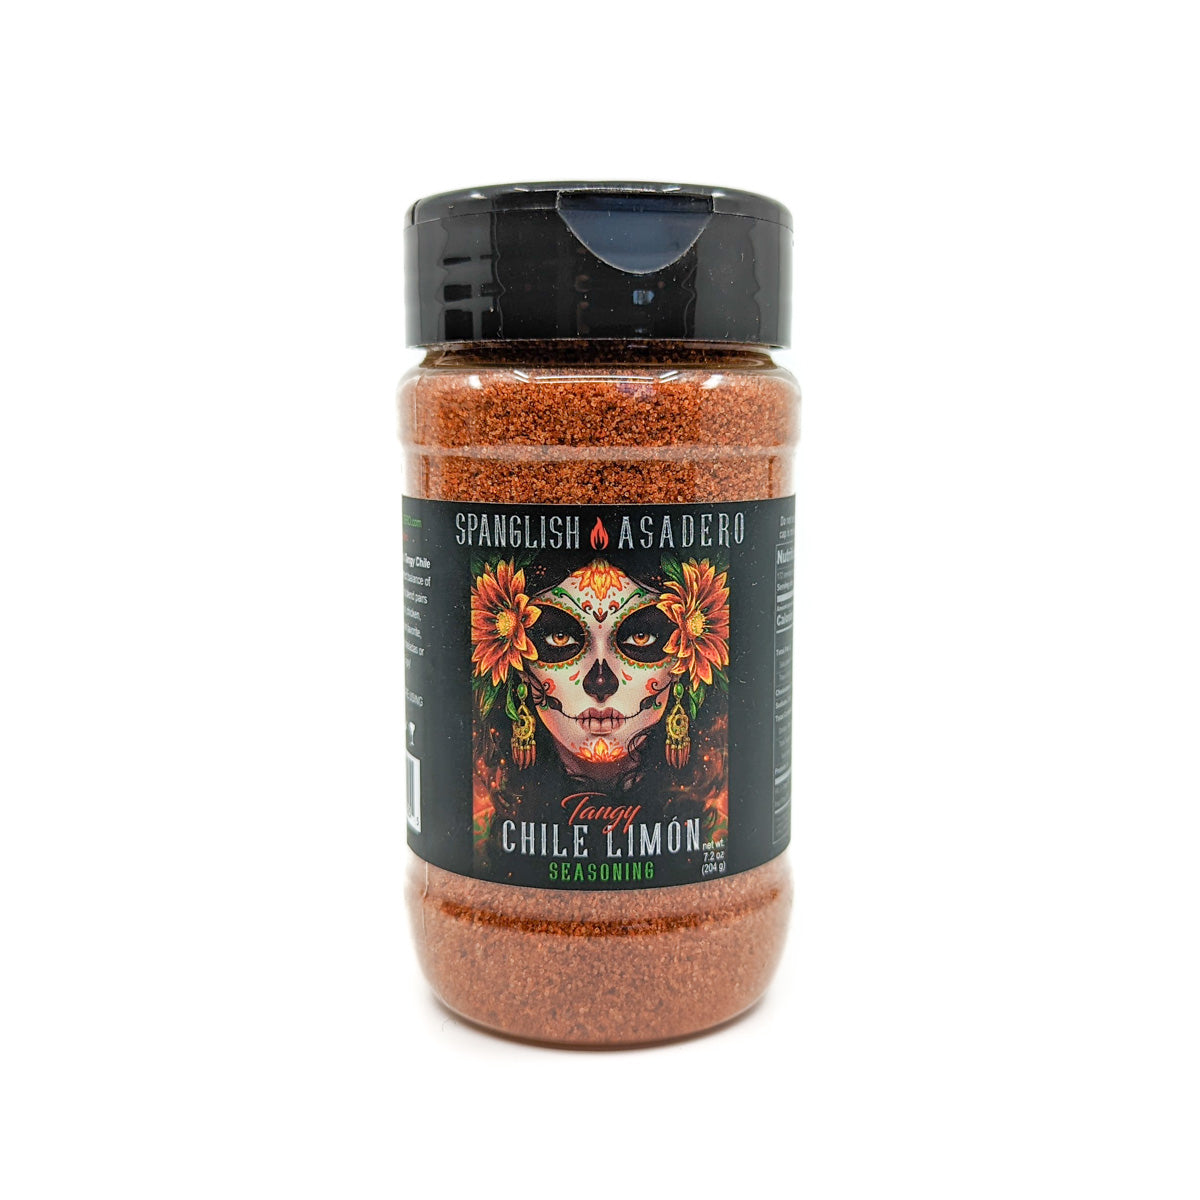 Spice up your day with Tangy Chile Limón Seasoning. It is a perfect balance of salt, spices &amp; lime. This seasoning pairs well with fish, vegetables, fruit - or a fan favorite: rimming Margaritas, Micheladas or Bloody Marys. Enjoy! 7.2 oz jar